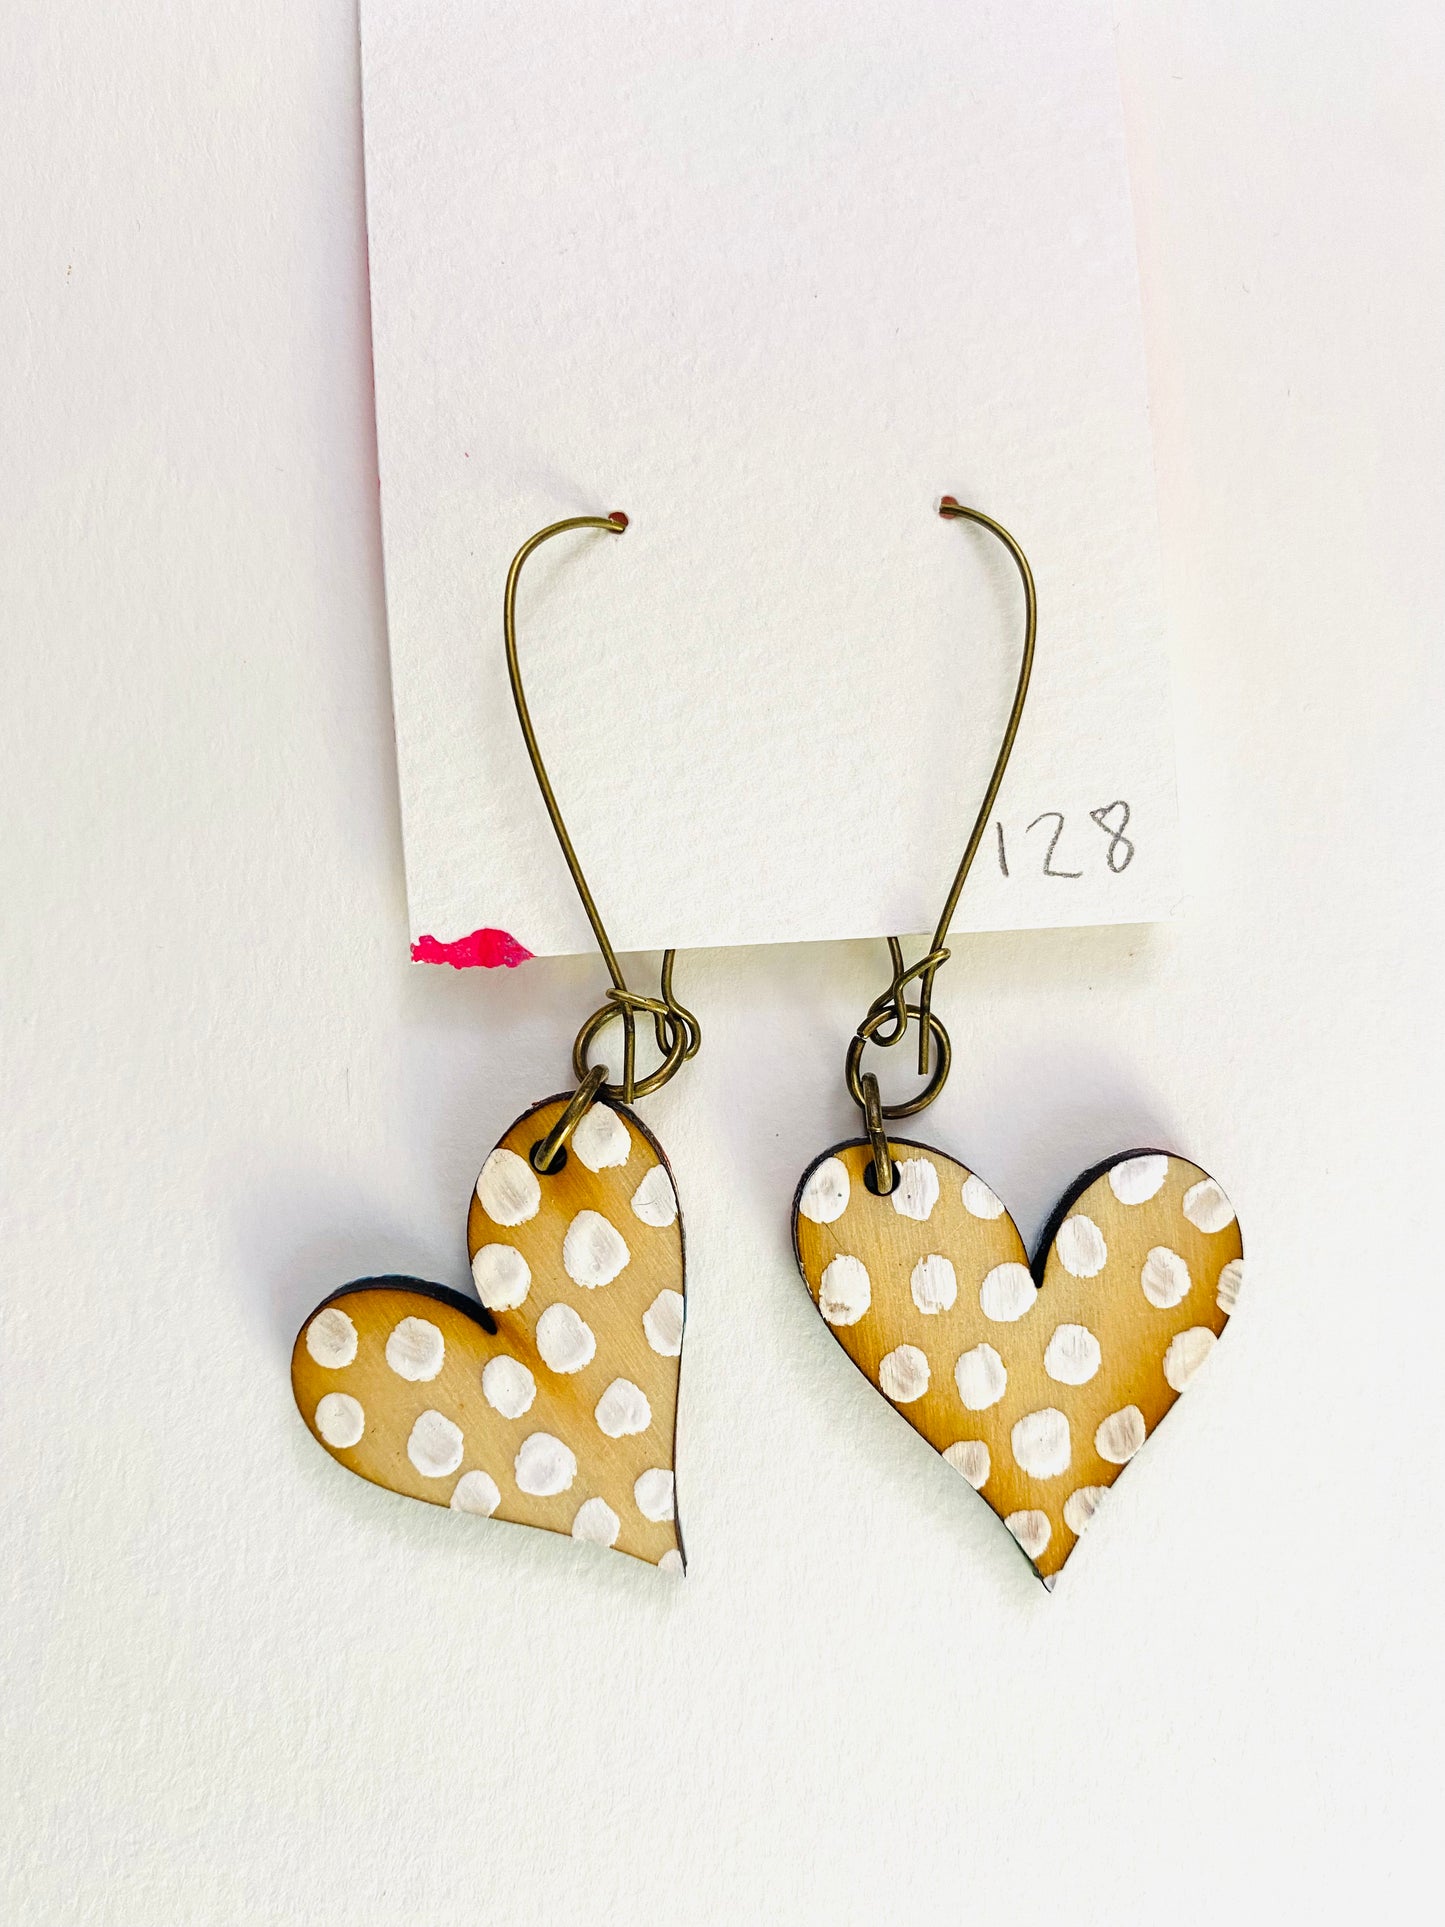 Colorful, Hand Painted, Heart Shaped Earrings 128